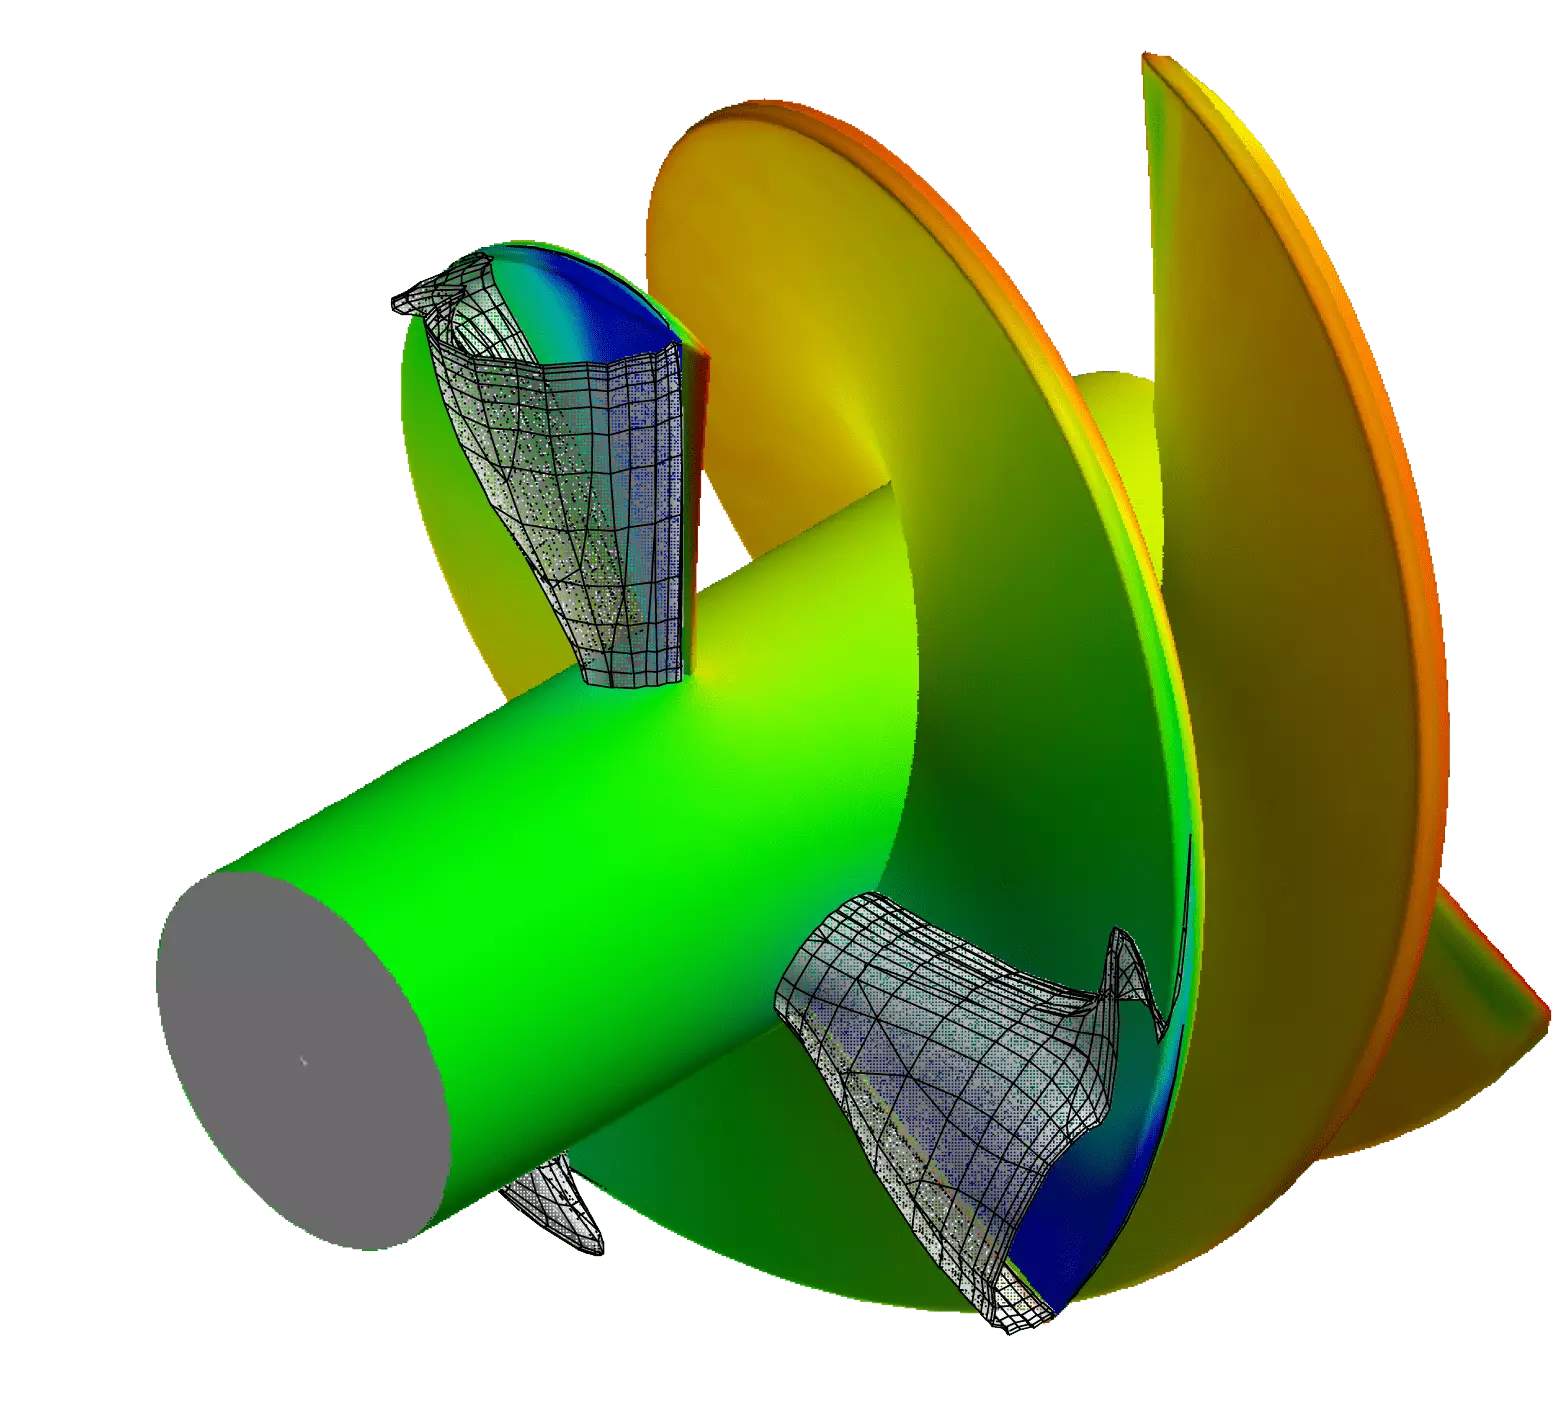 Pumps and Hydraulic Turbines